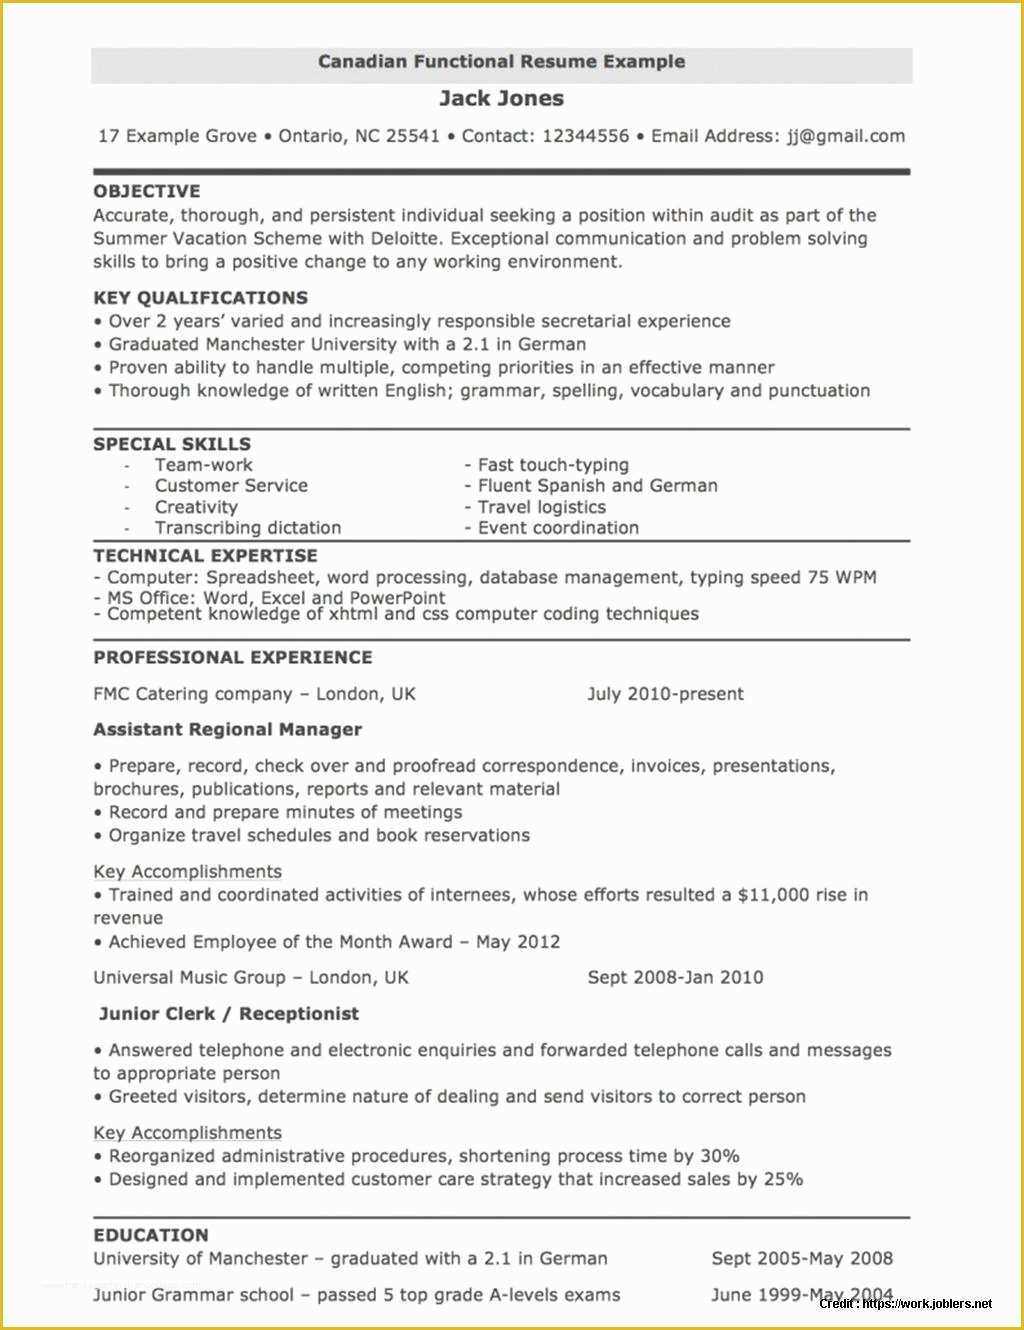 Functional Resume Template Free Download Of Functional Resume Templates Free Download Resume